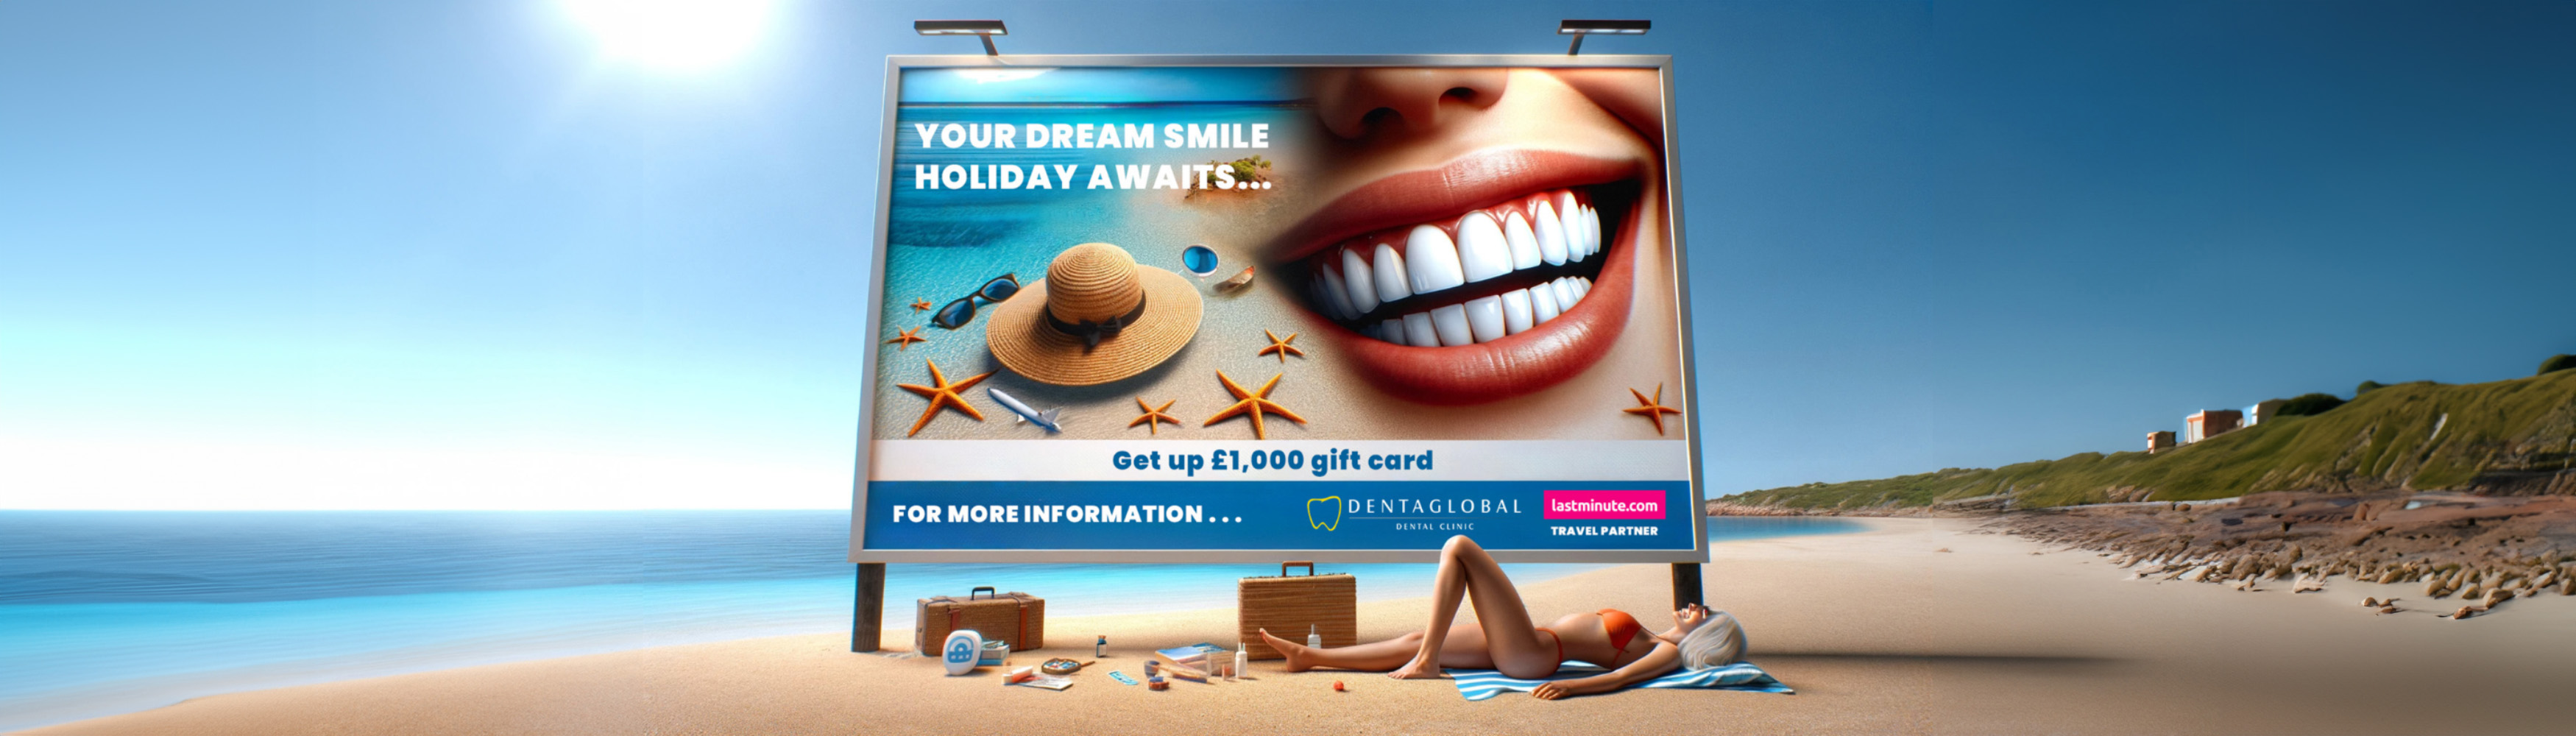 Holiday Smile Package